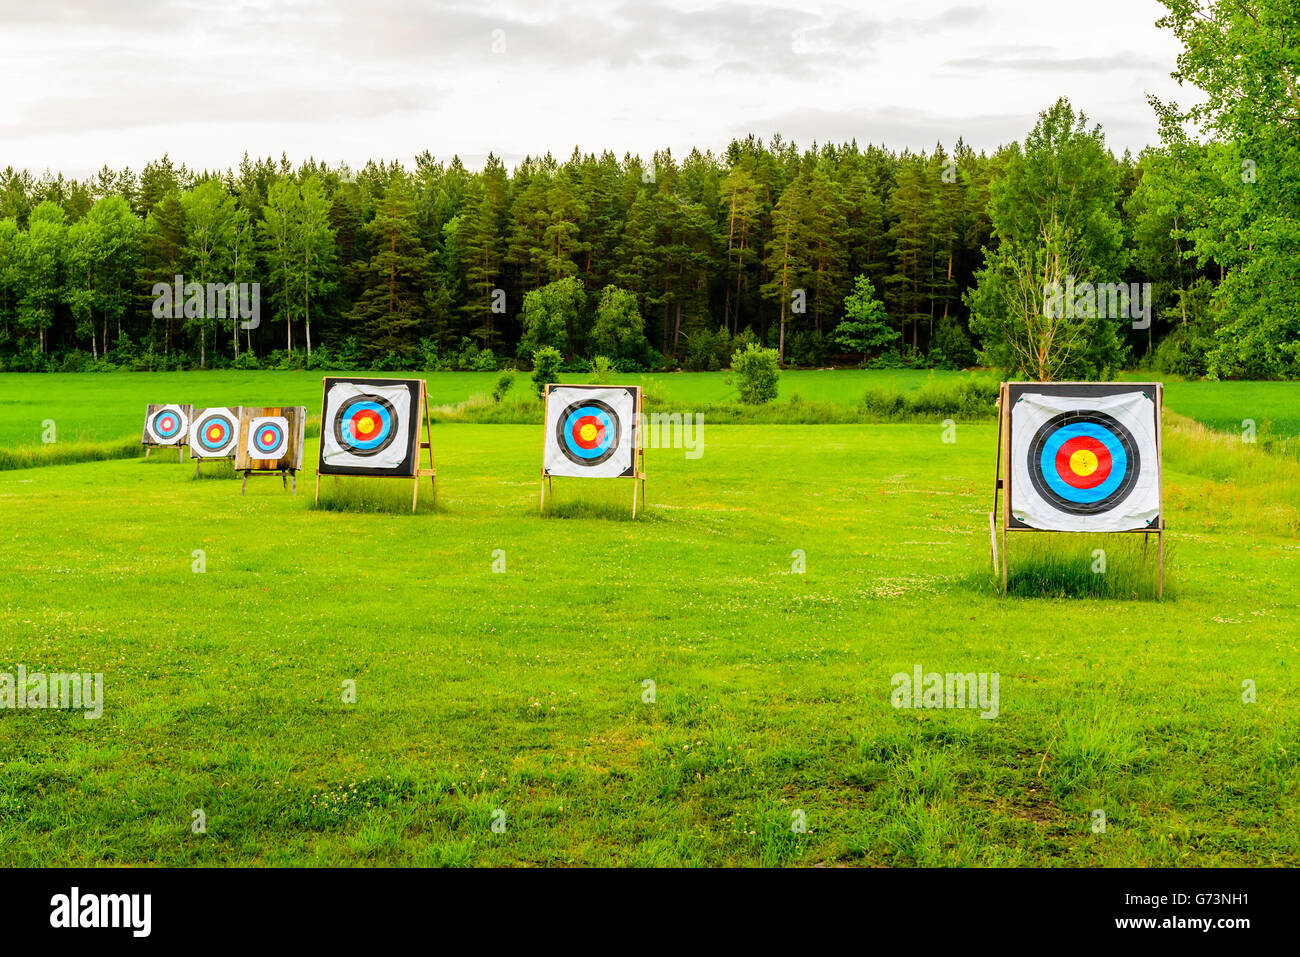 Outdoor Archery Targets On Grass Field Surrounded By Forest In The G73NH1 